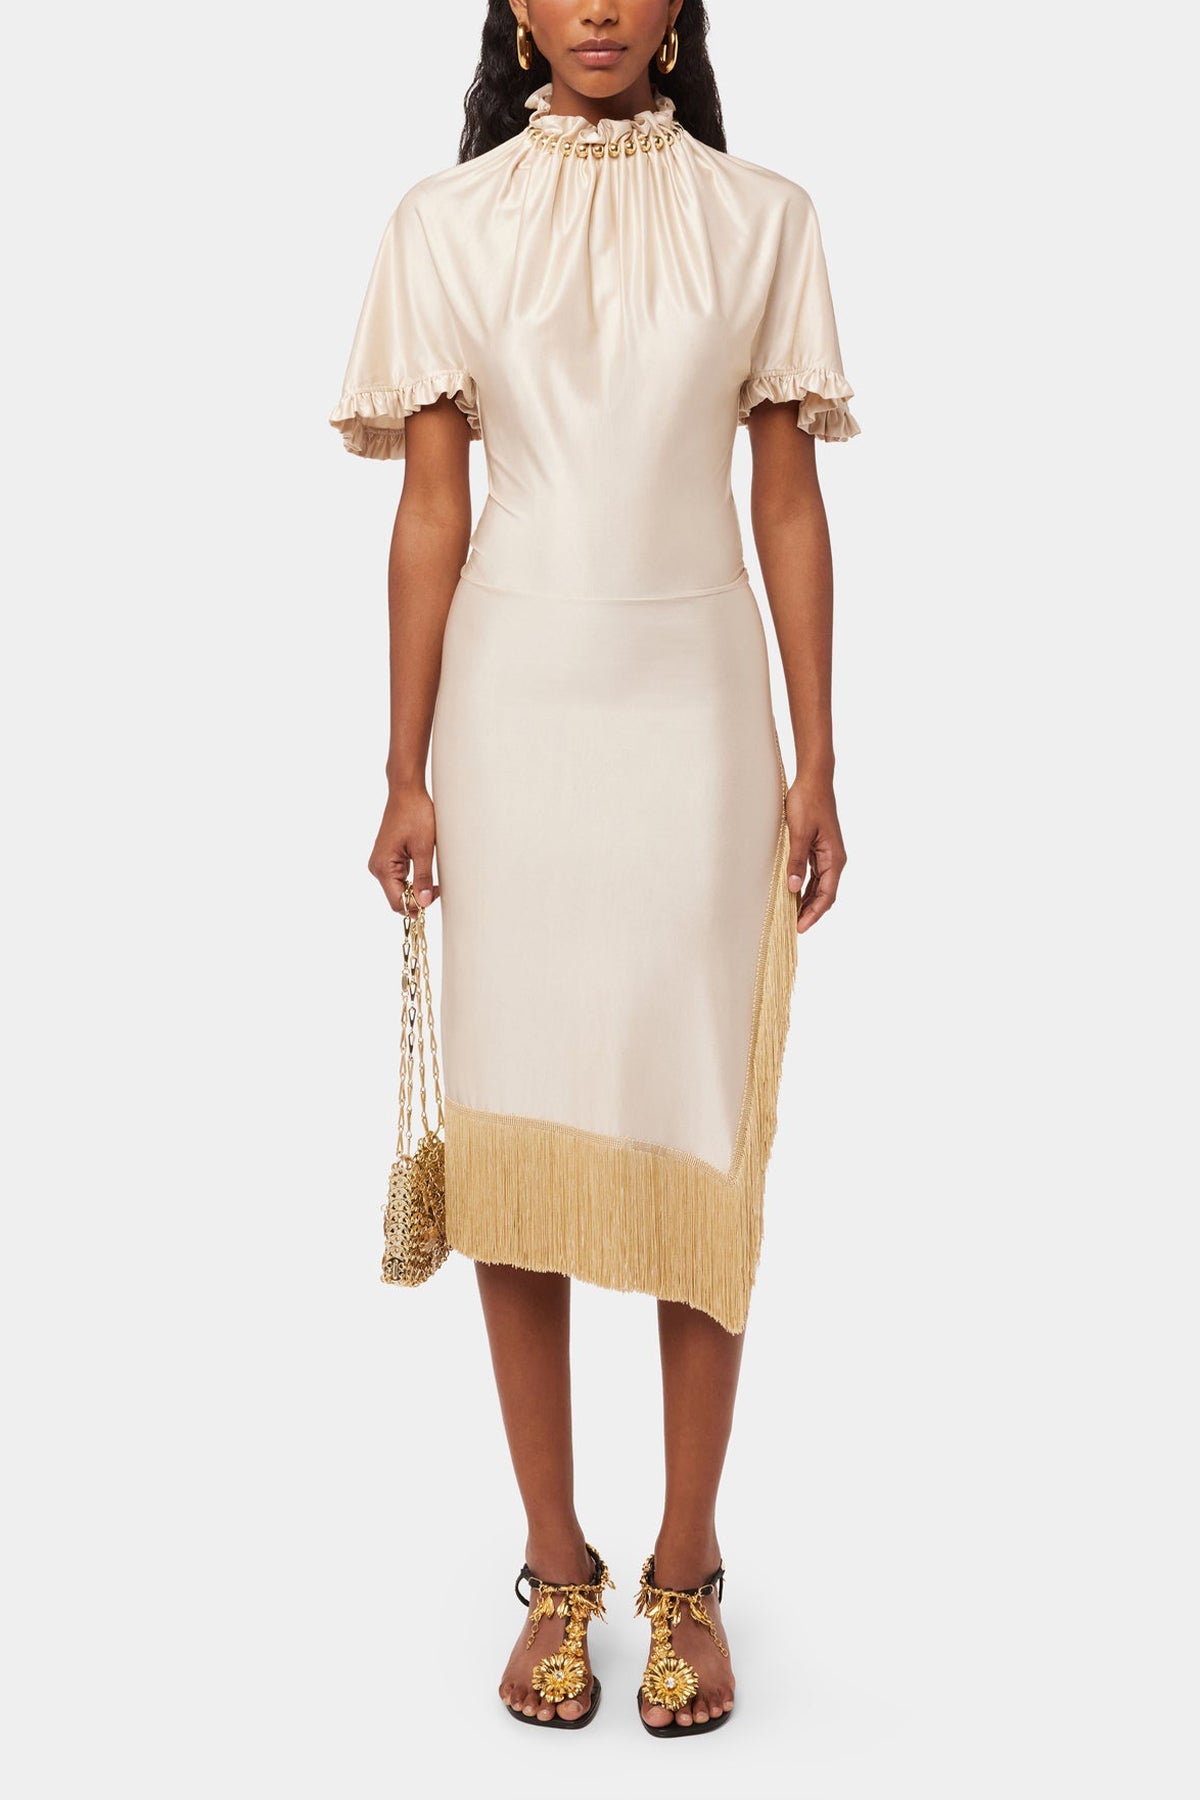 Jersey Cream Dress with Beads in Nude - shop-olivia.com